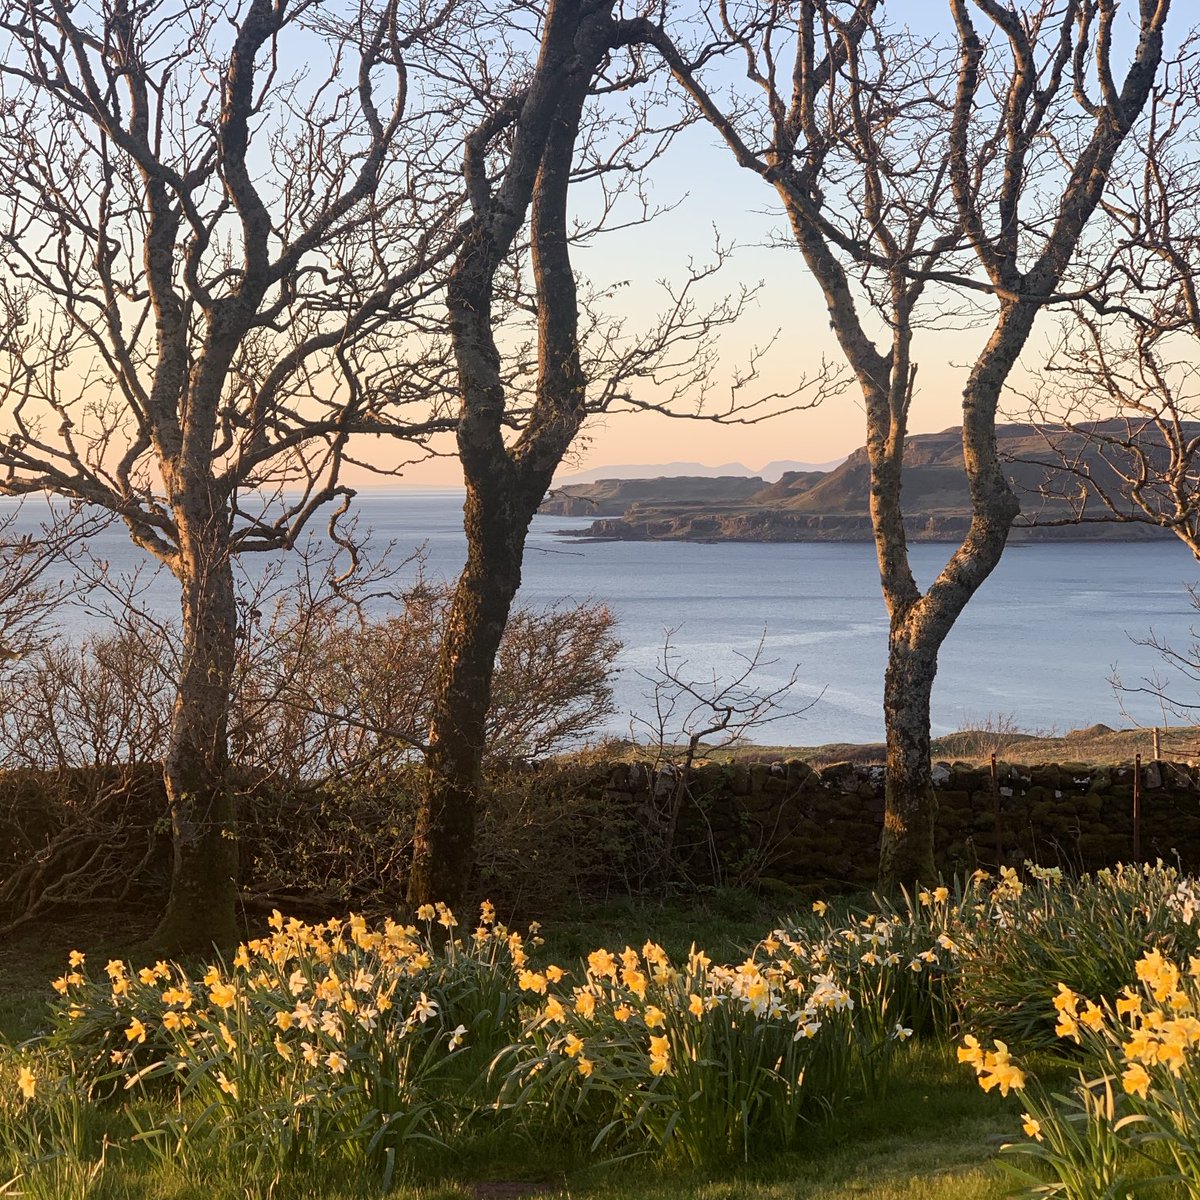 We are offering 10% off on the last remaining spaces during the month of April. Check treshnish.co.uk//make-a-bookin… for dates and email me so I can make the booking for you and apply the discount. #isleofmull #greentourism #naturefriendlyfarming